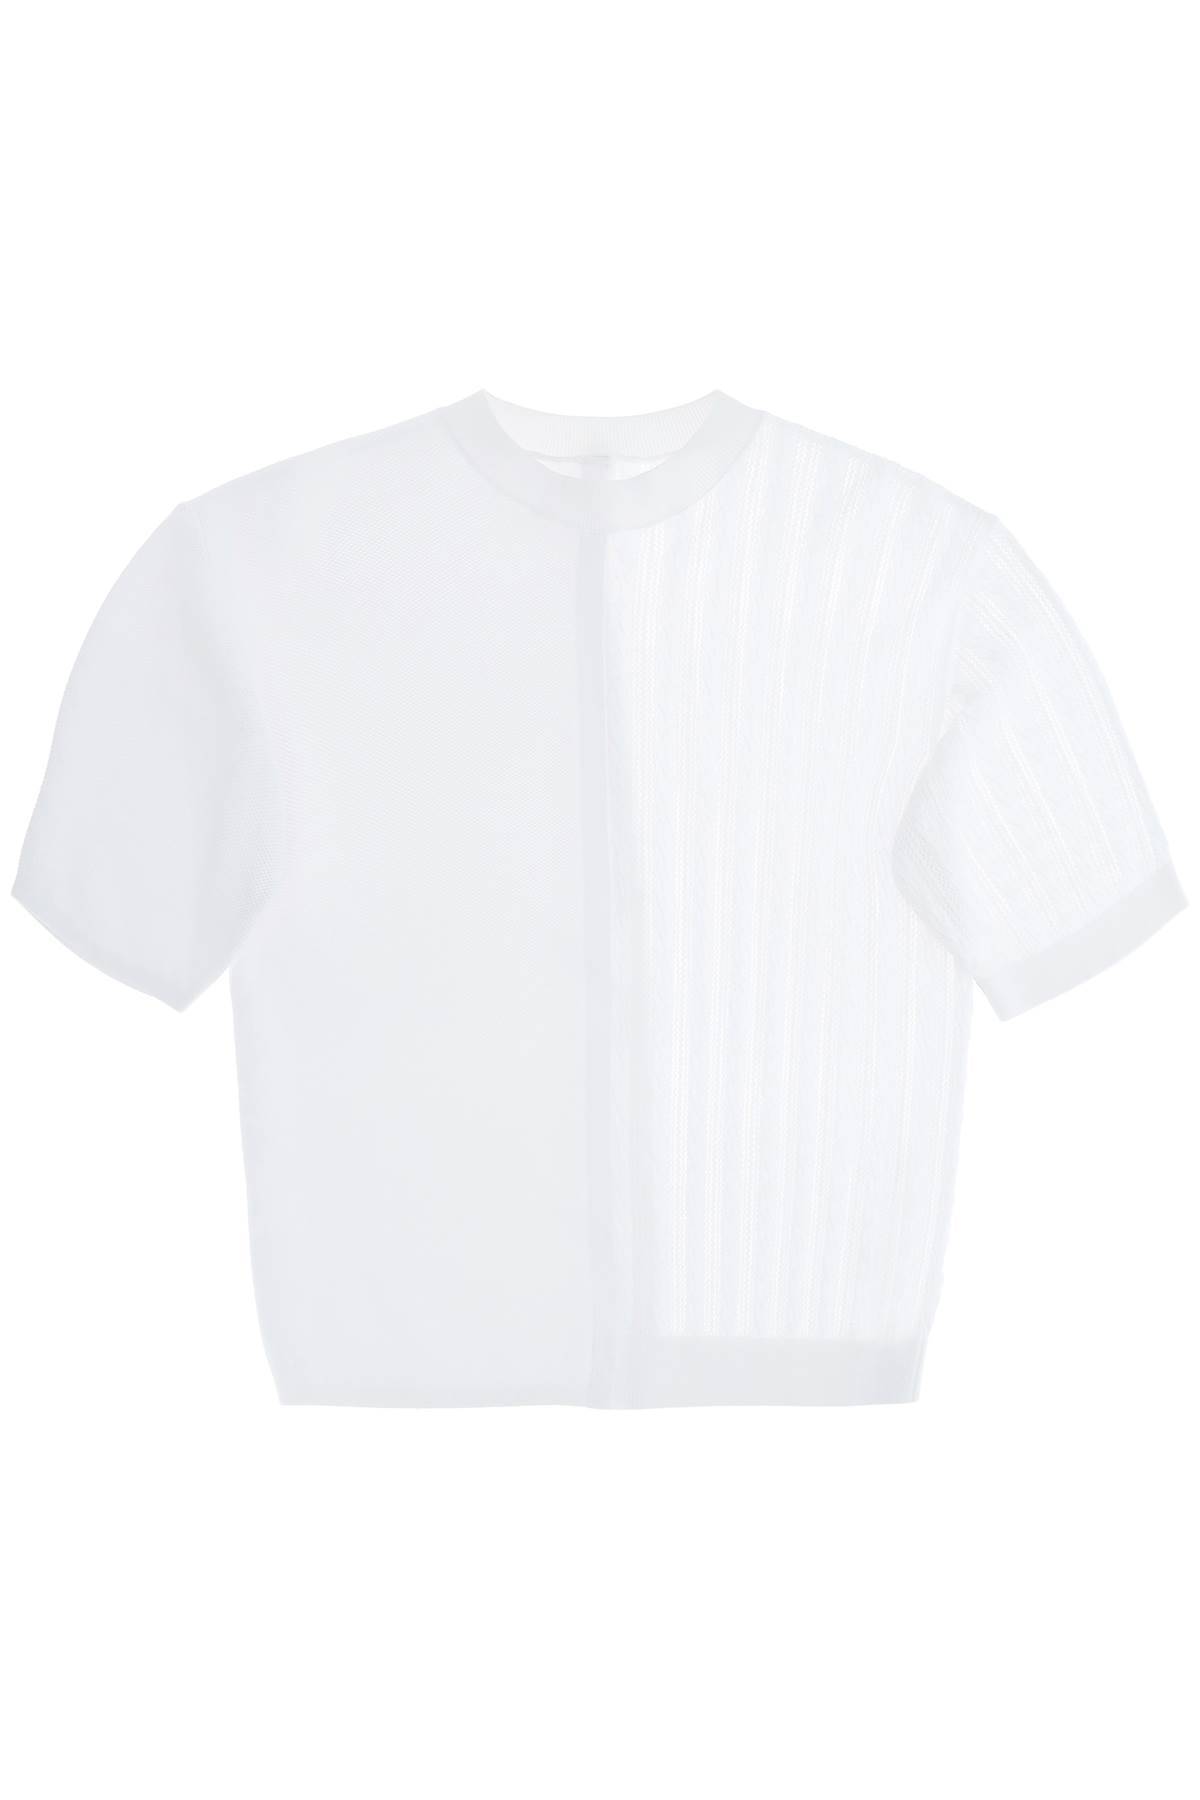 Shop Jacquemus Knit Top The High Game Knit In White